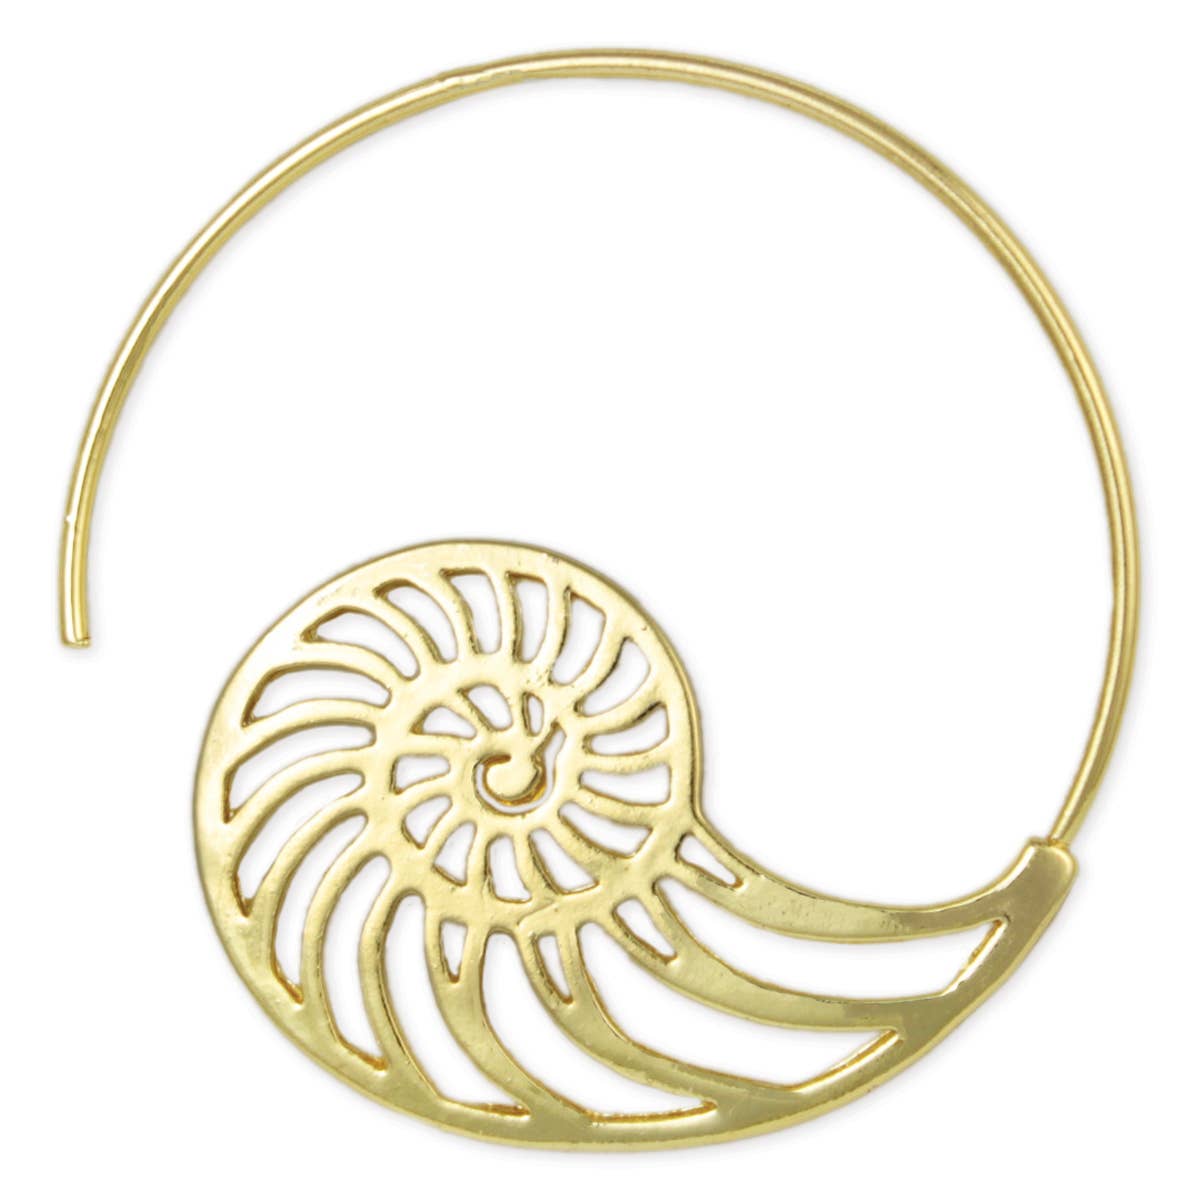 Stylish Spiral Gold Shell Hoop Earrings - Spiral Circle